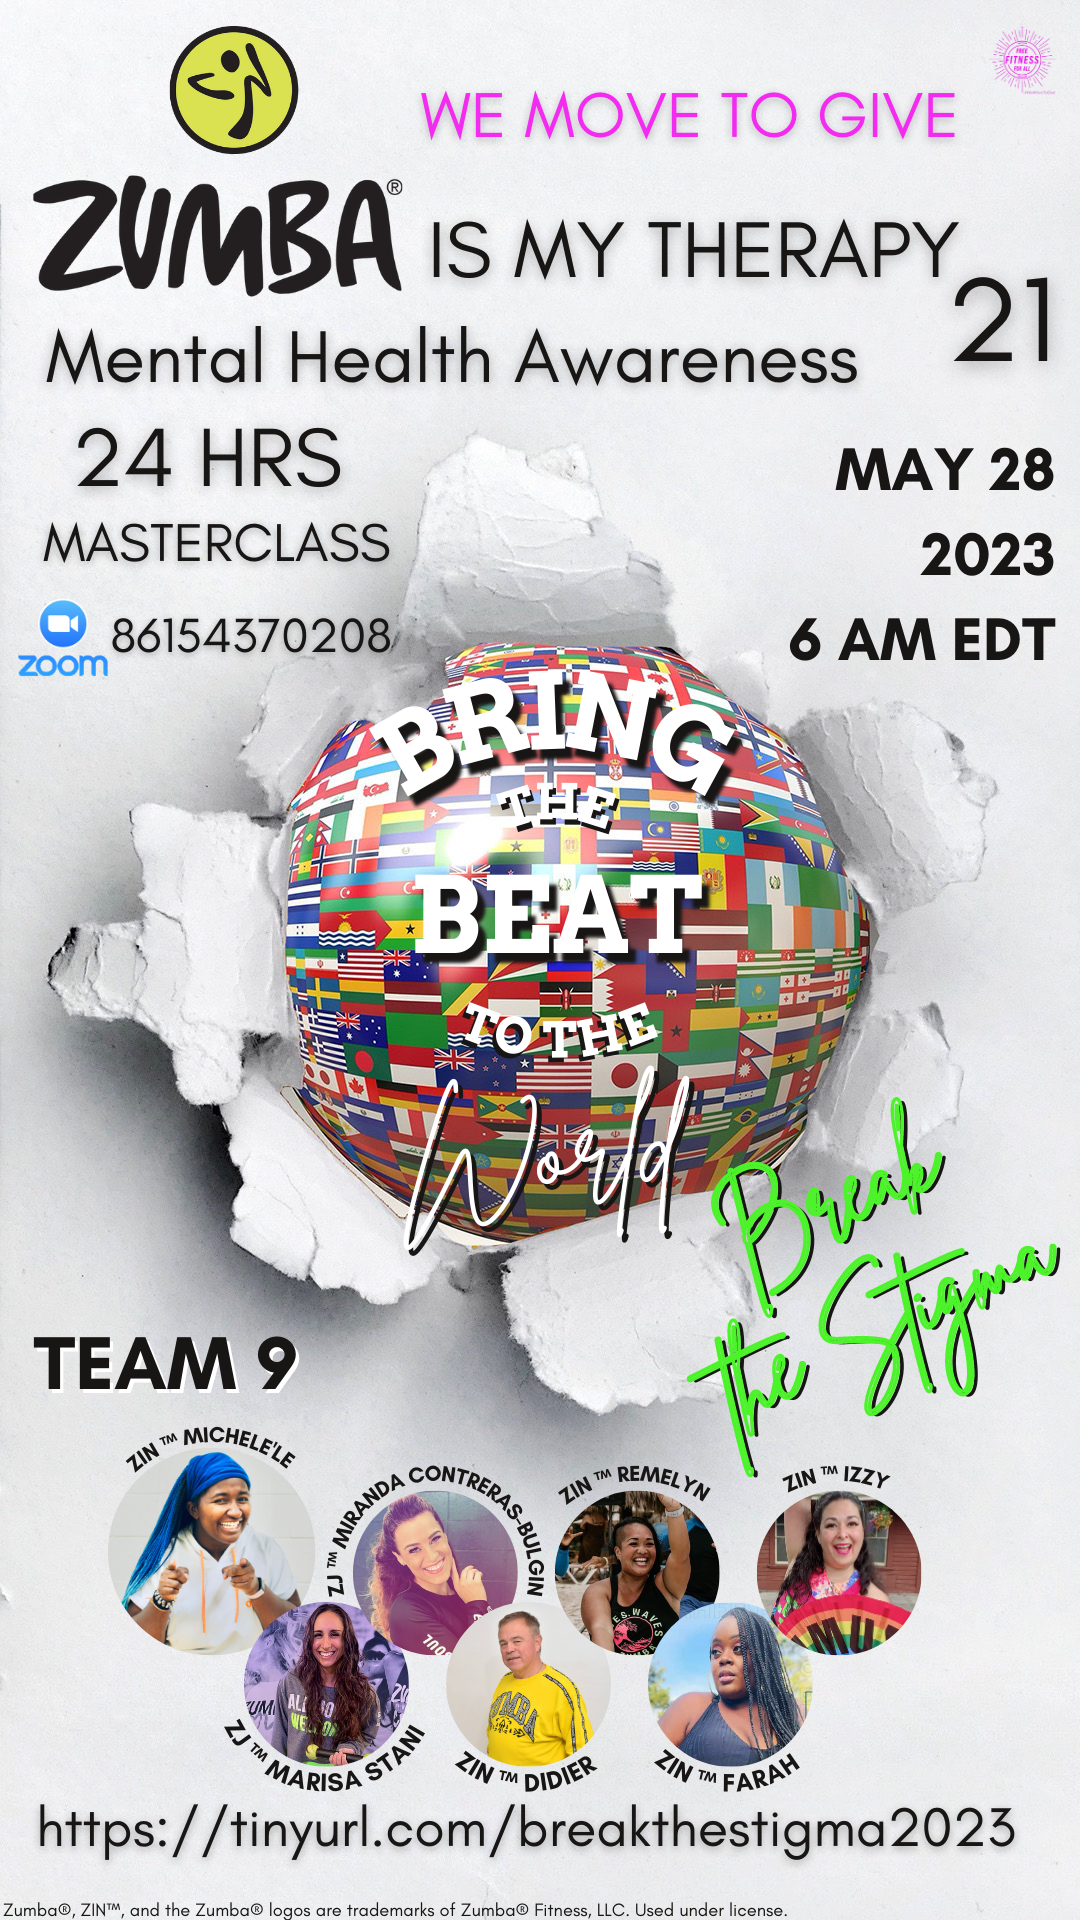 Team 9 - May 28th 6 AM EDT